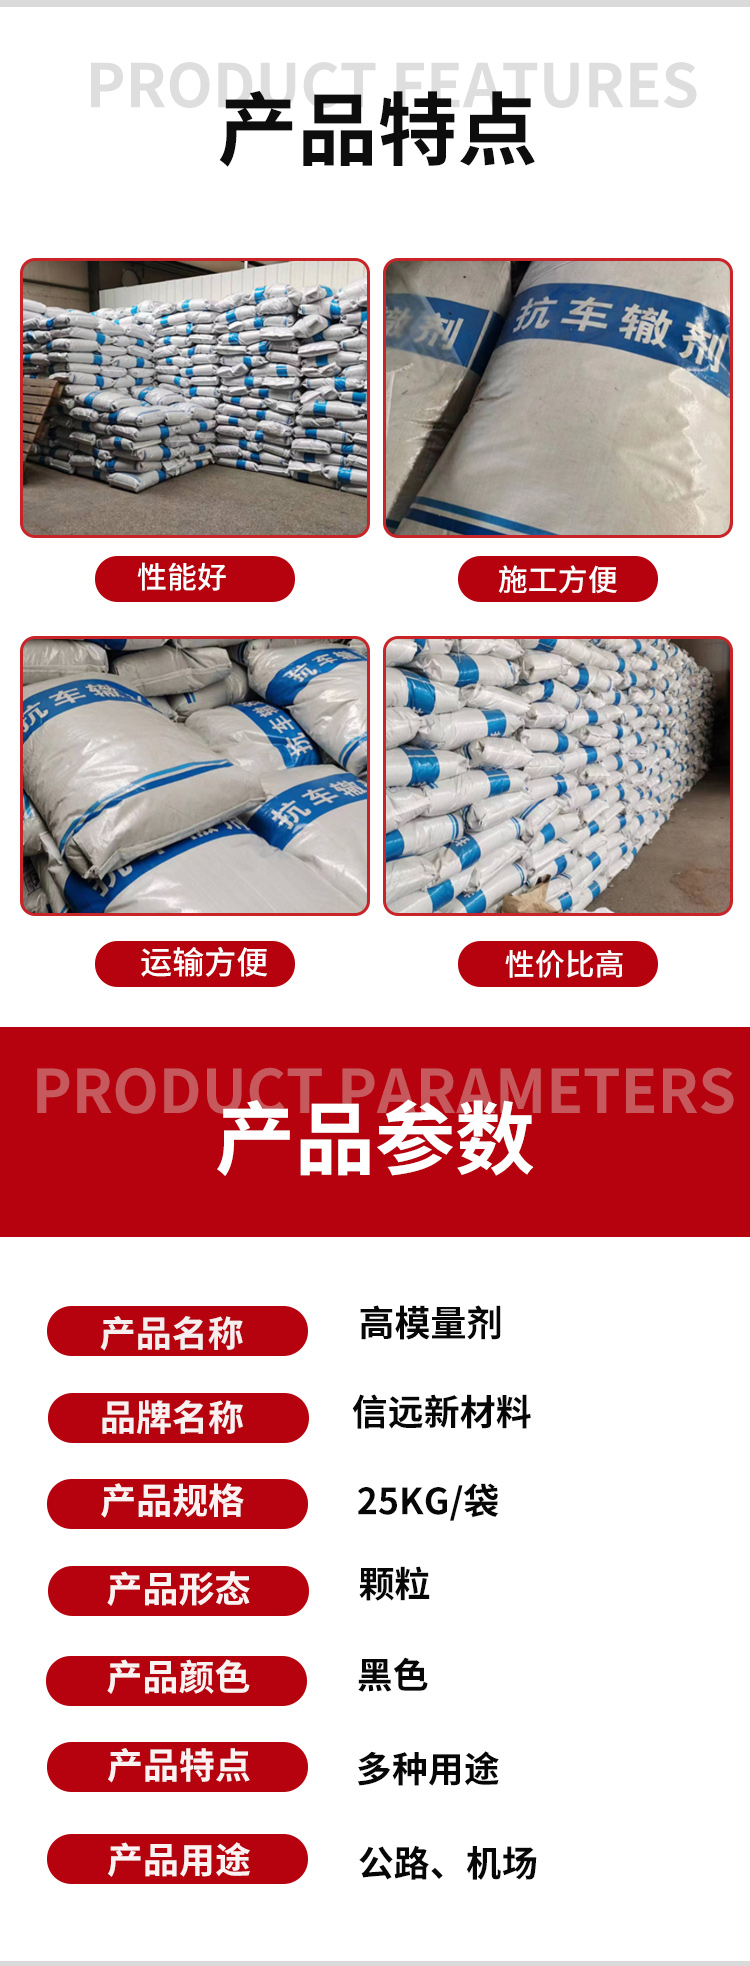 Full production and sales specifications of anti rutting agent, pan Asian asphalt modifier, additive, high modulus agent